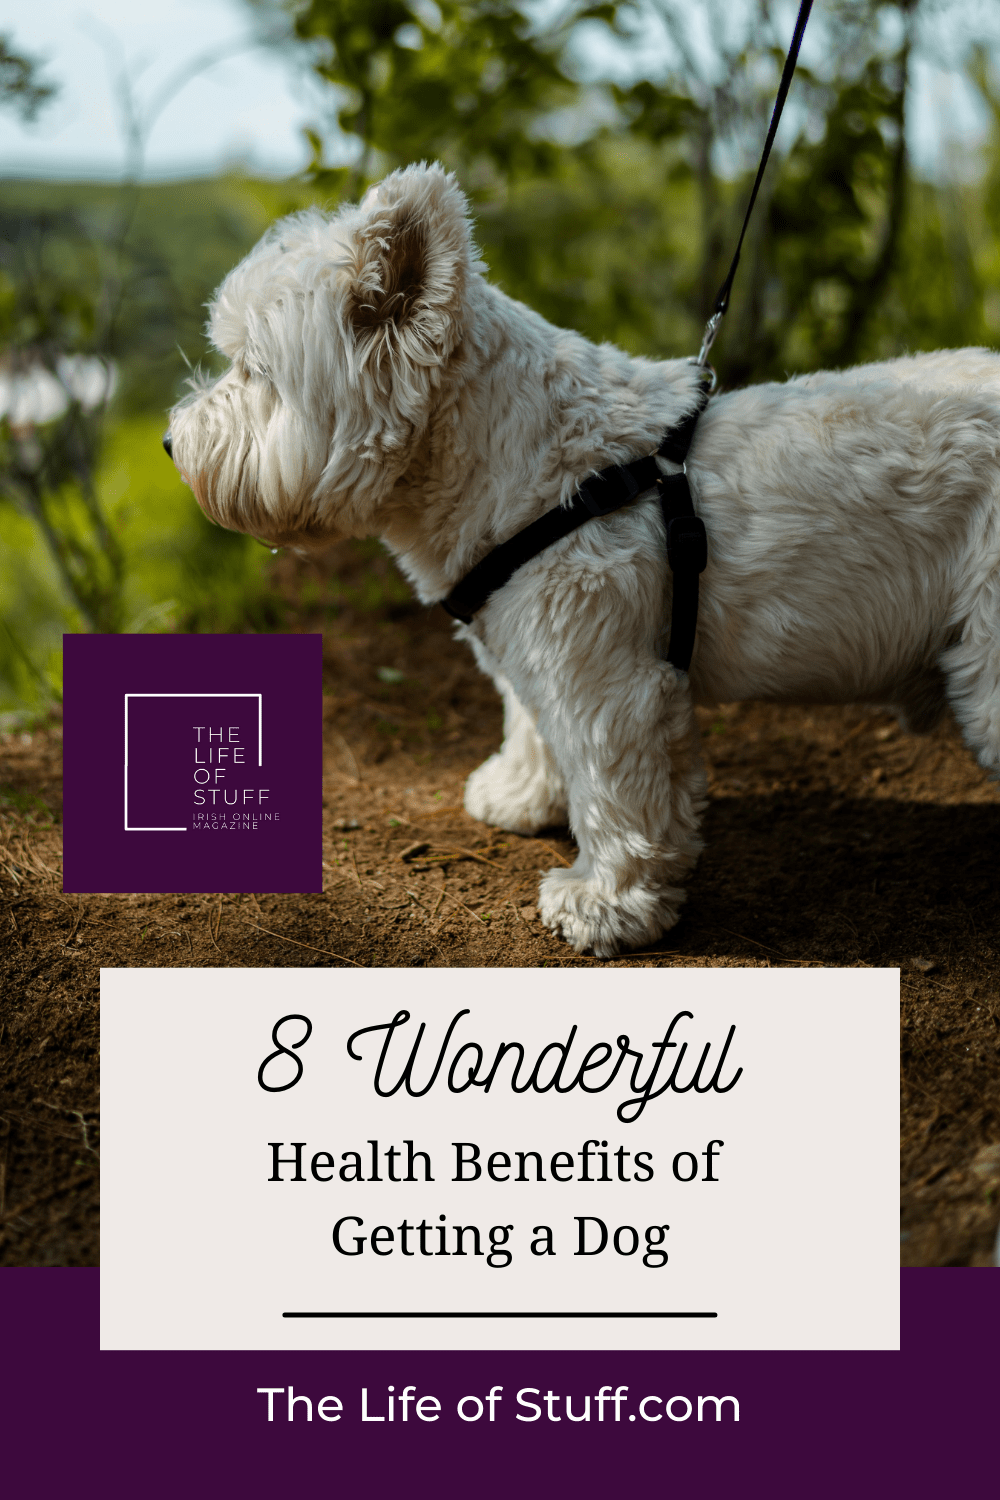 8 Wonderful Health Benefits of Getting a Dog - The Life of Stuff online magazine